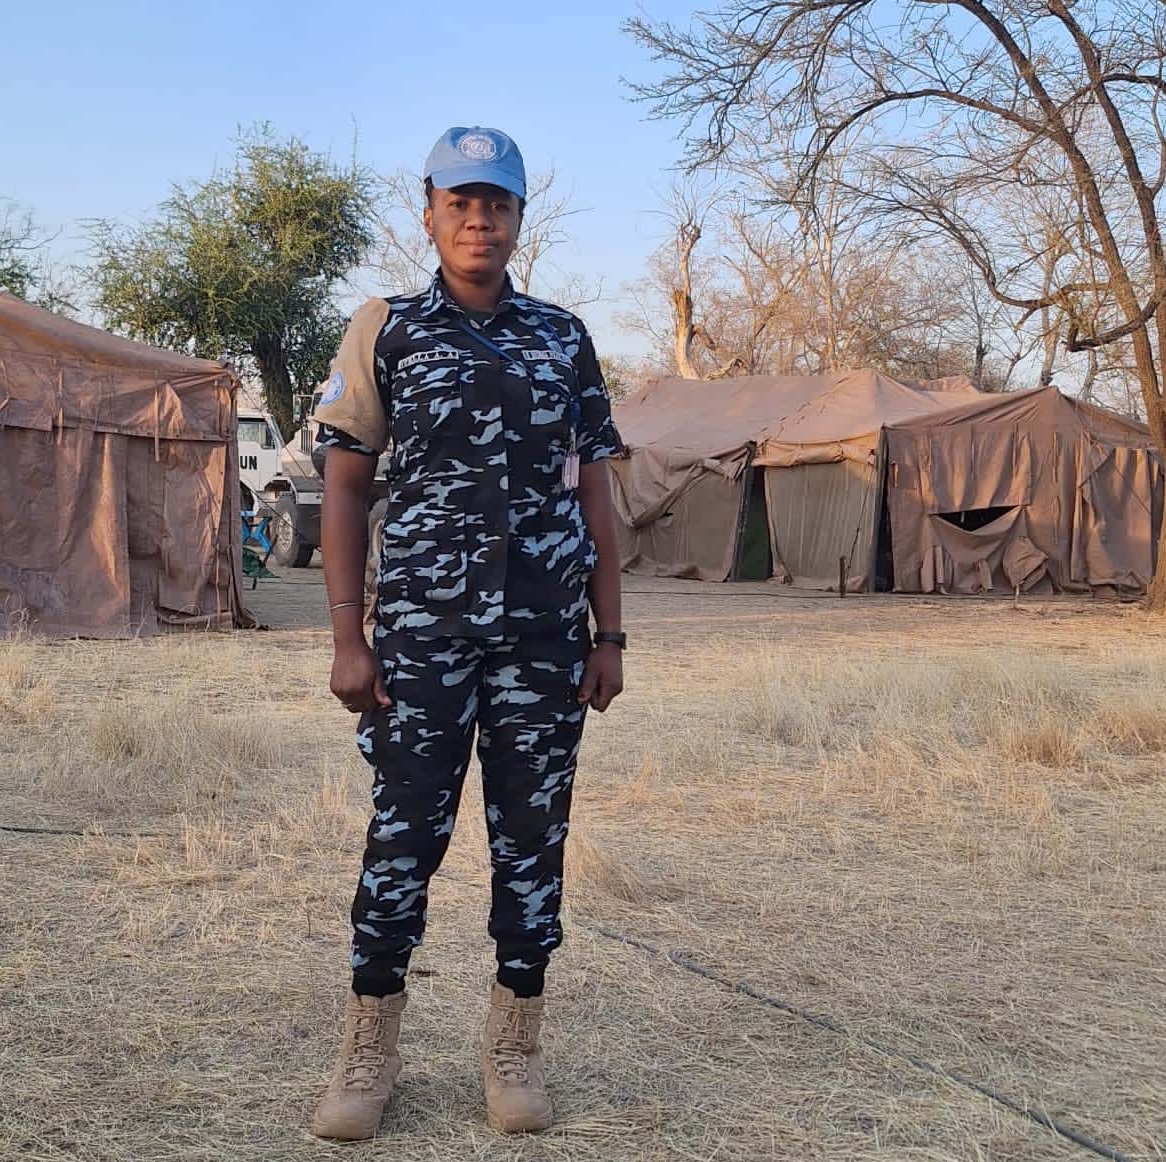 Meet Adebayo Stella Adejumo, an @UN Police Advisor from #Nigeria 🇳🇬, reflecting on her time serving with #UNMISS in #SouthSudan, protecting civilians, building  capacity of local colleagues, + forming bonds with the host community: tinyurl.com/3223pyj4
#A4P #WomenPeaceSecurity